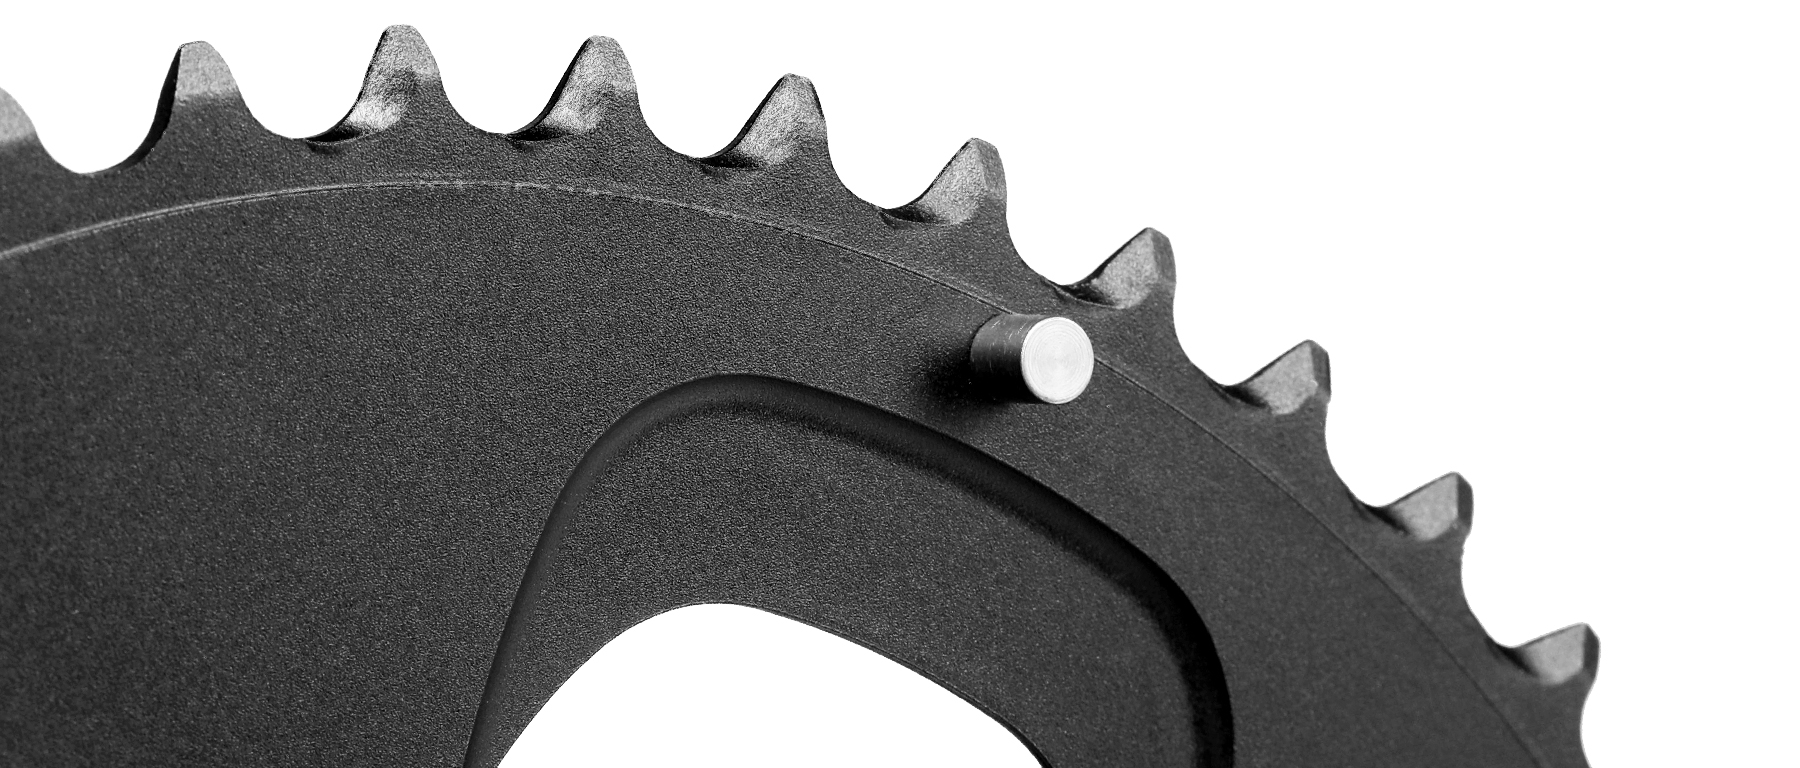 SRAM Red Powerglide 10-Speed Outer Chainring